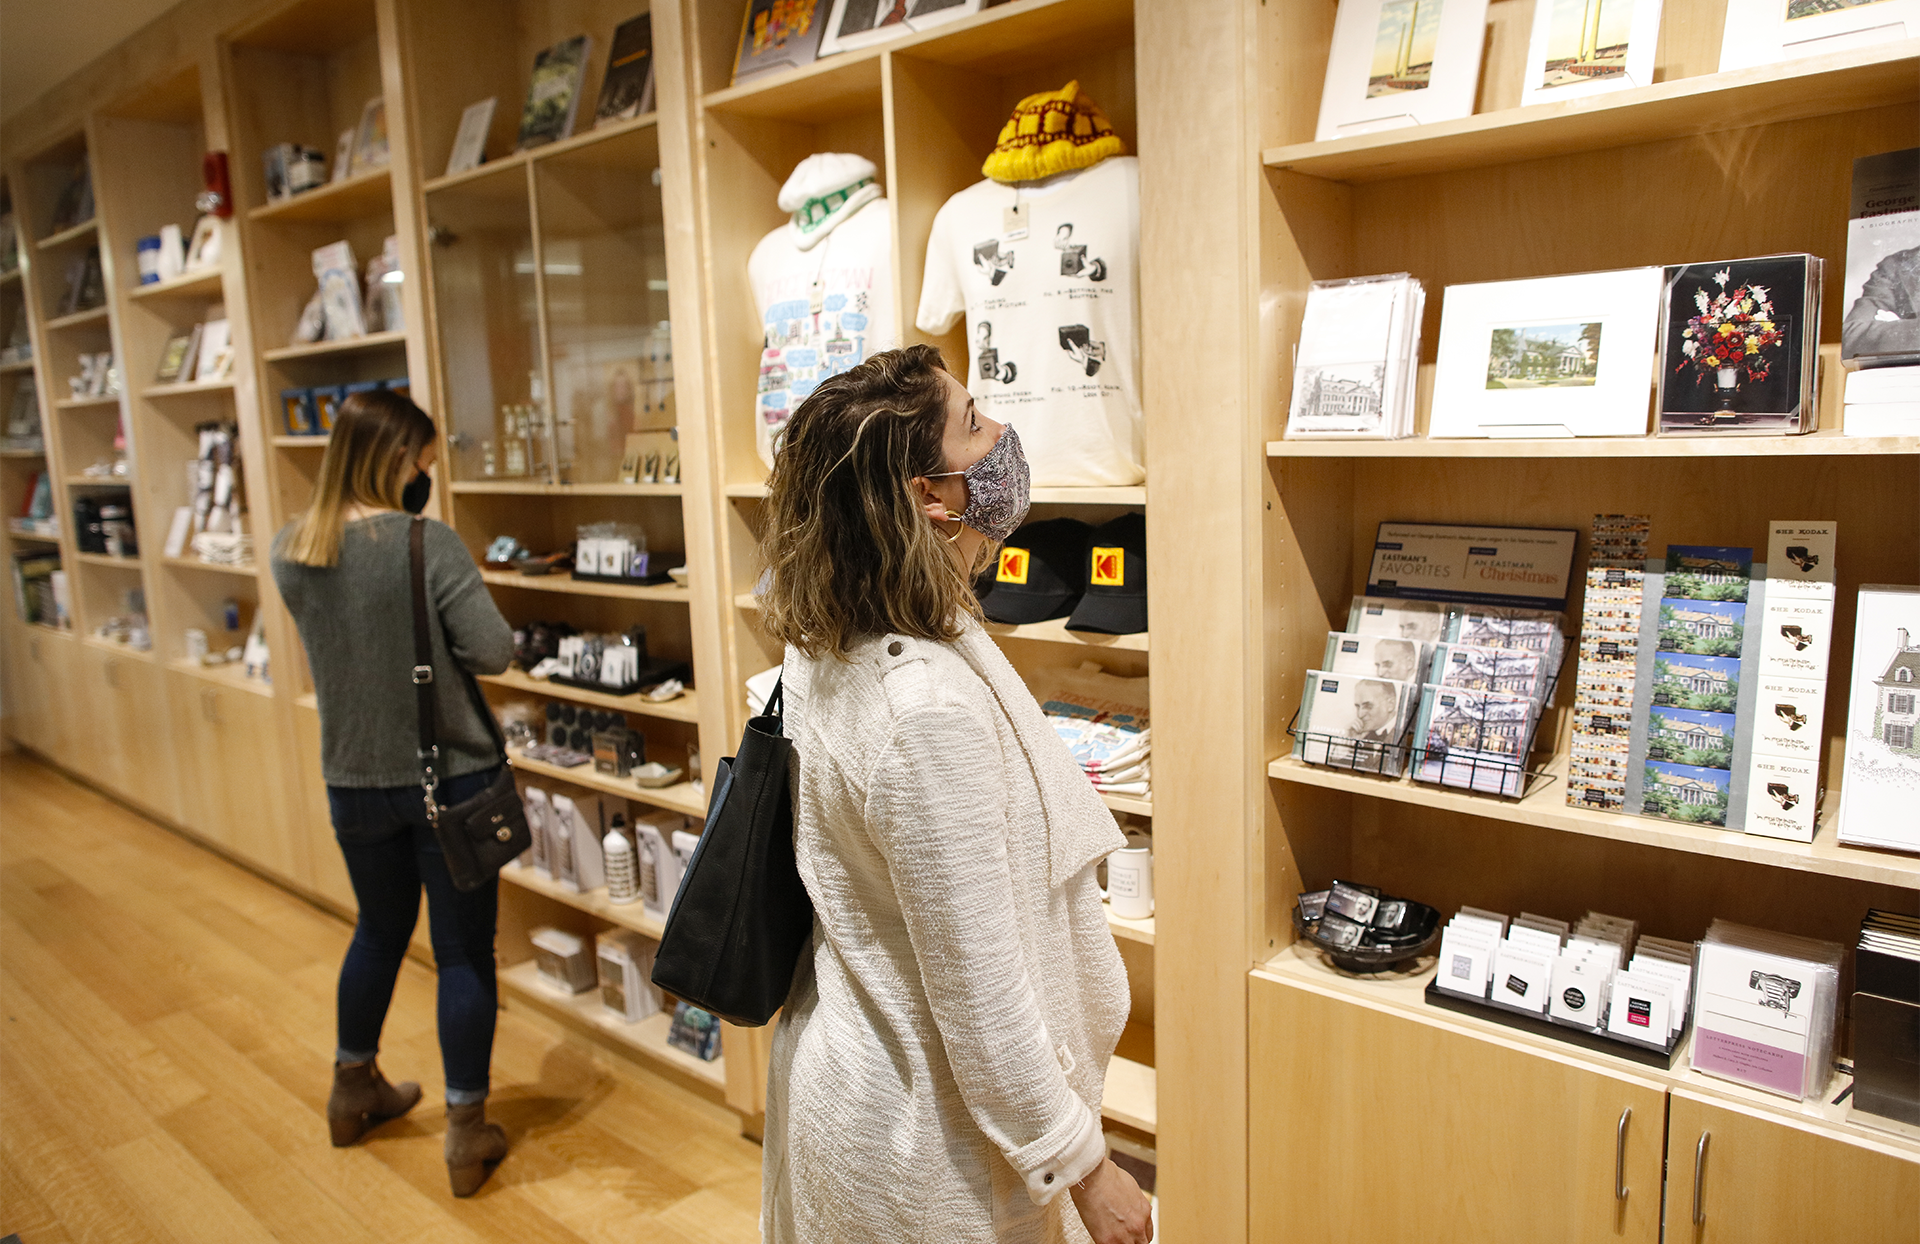 Person looking at shelves of merchandise in museum shop